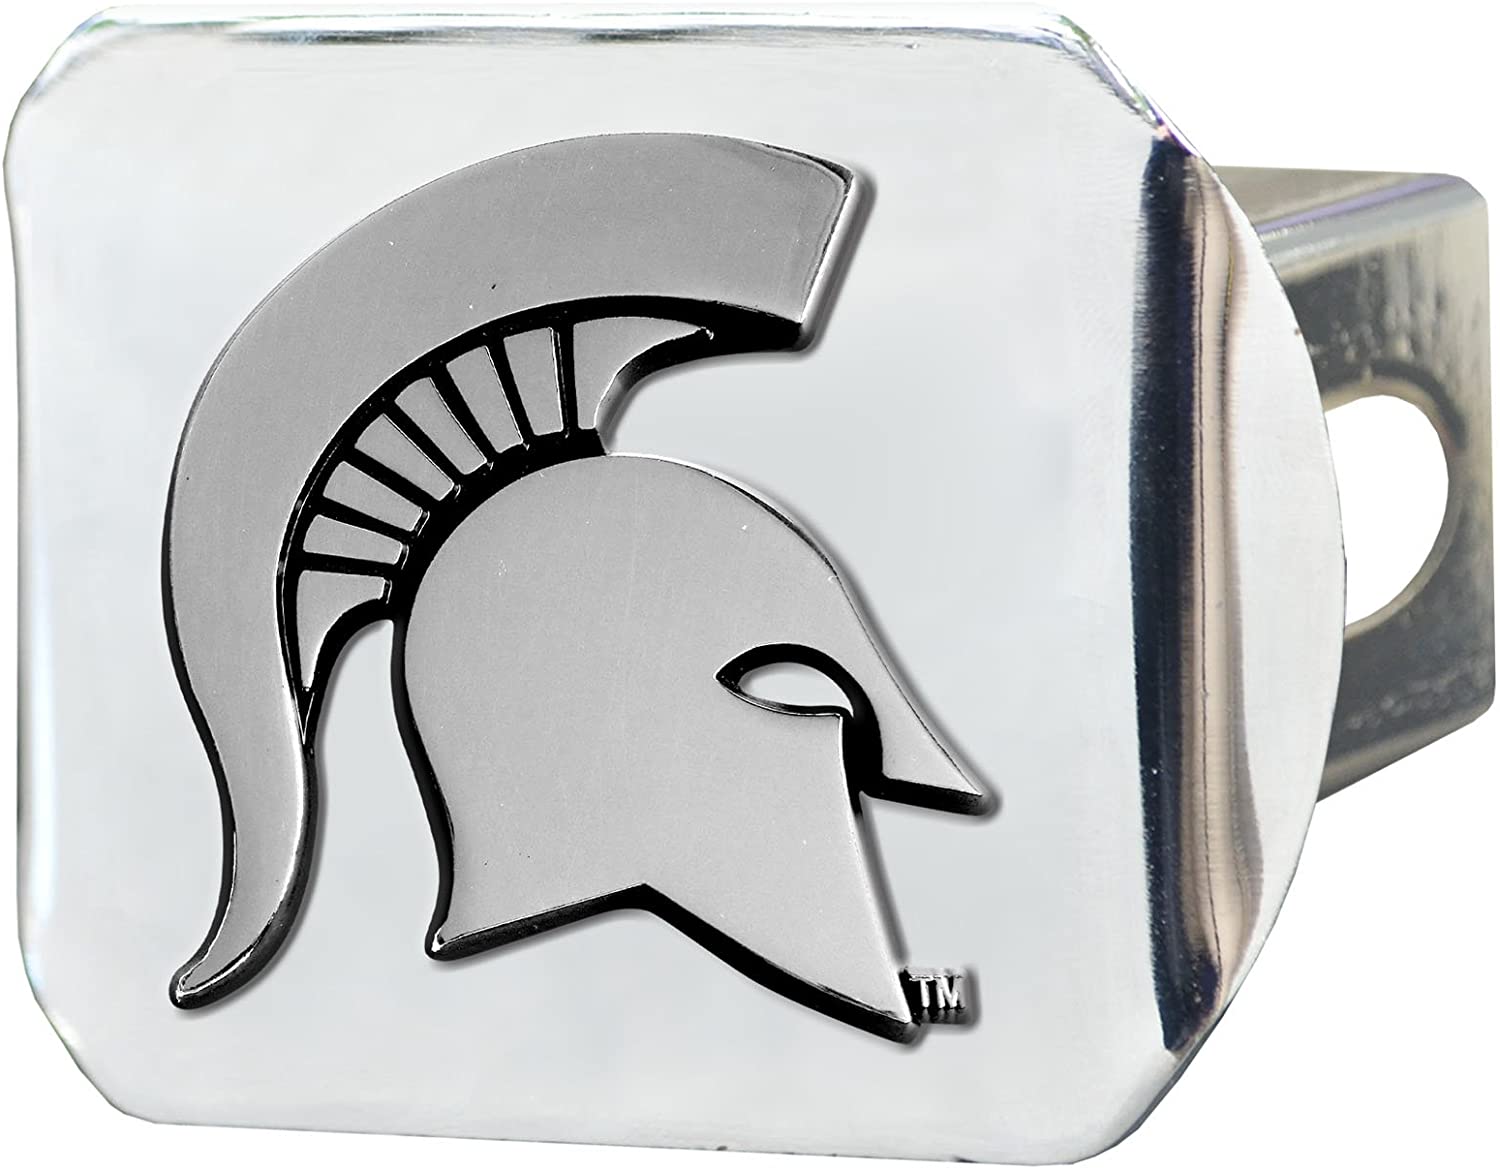 FANMATS 15073 NCAA Michigan State University Spartans Chrome Hitch Cover,3.4